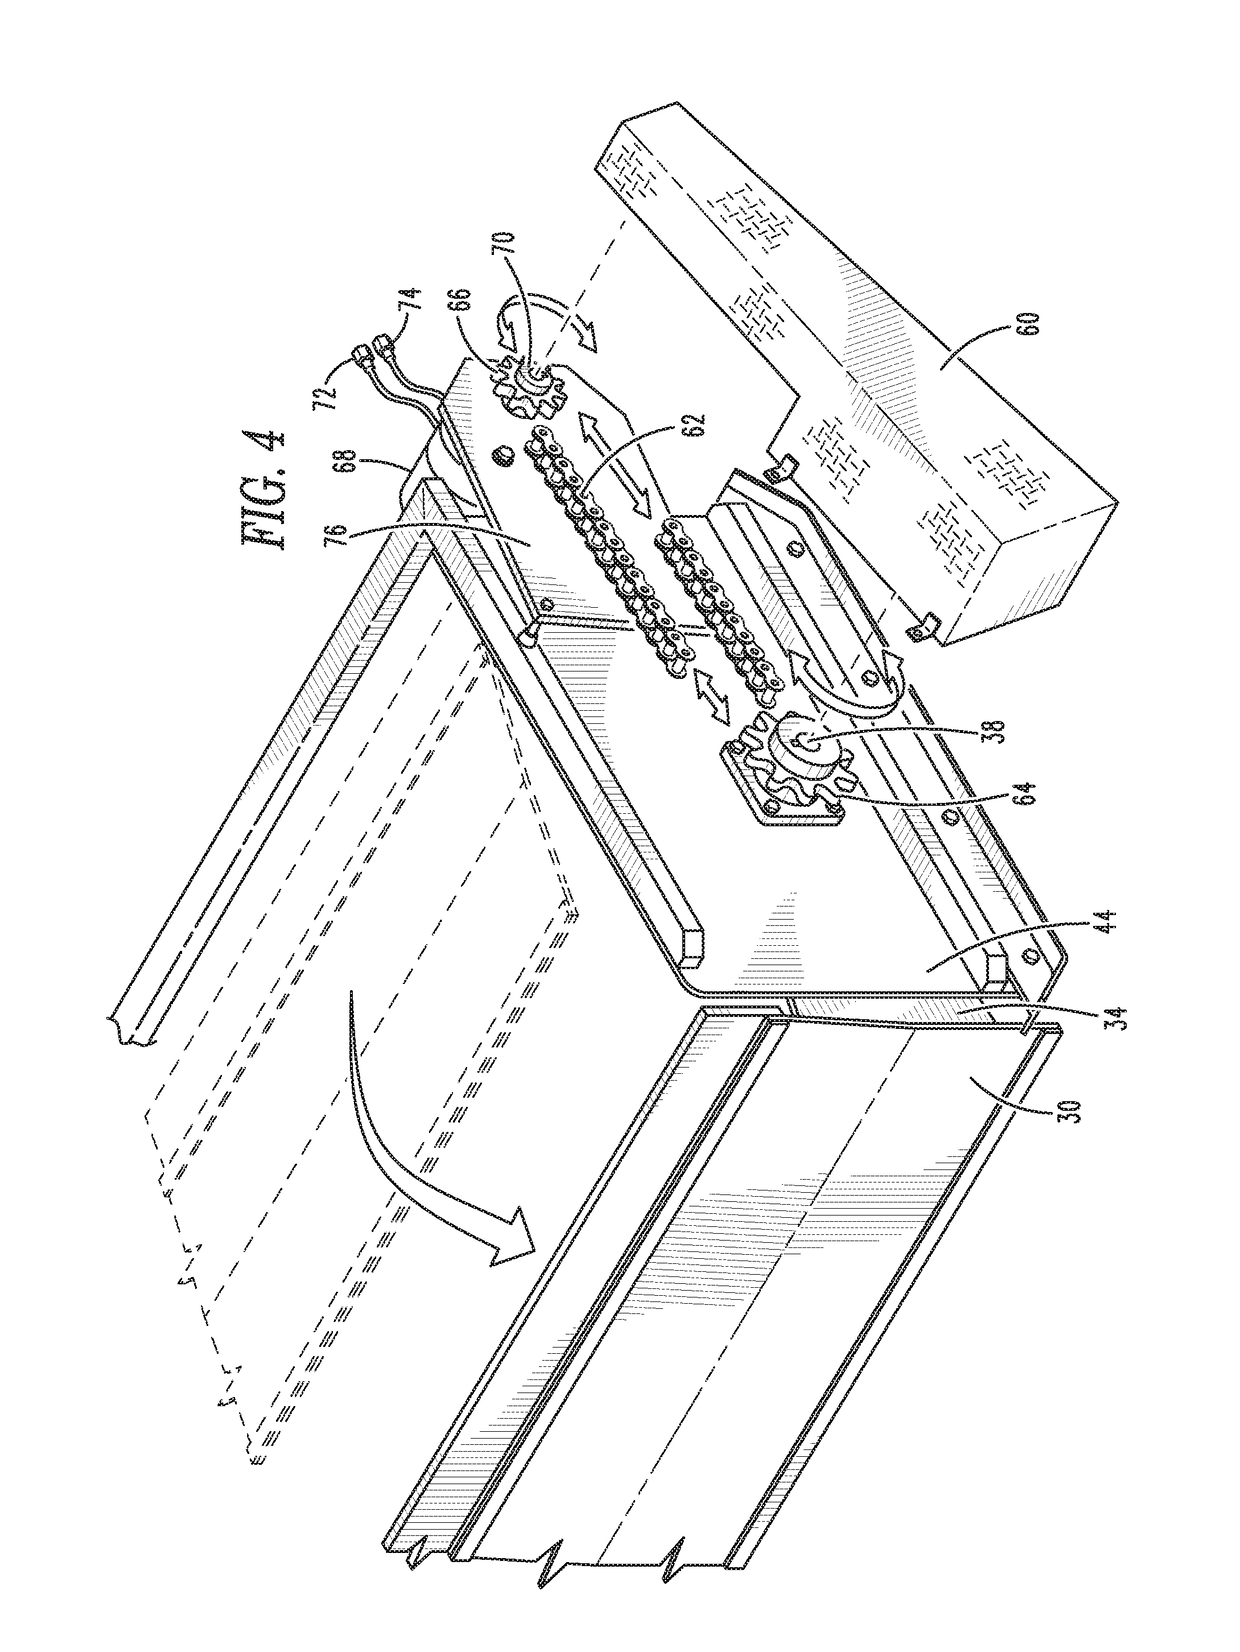 Rotatable snowplow blade apparatus, systems and methods of using the same